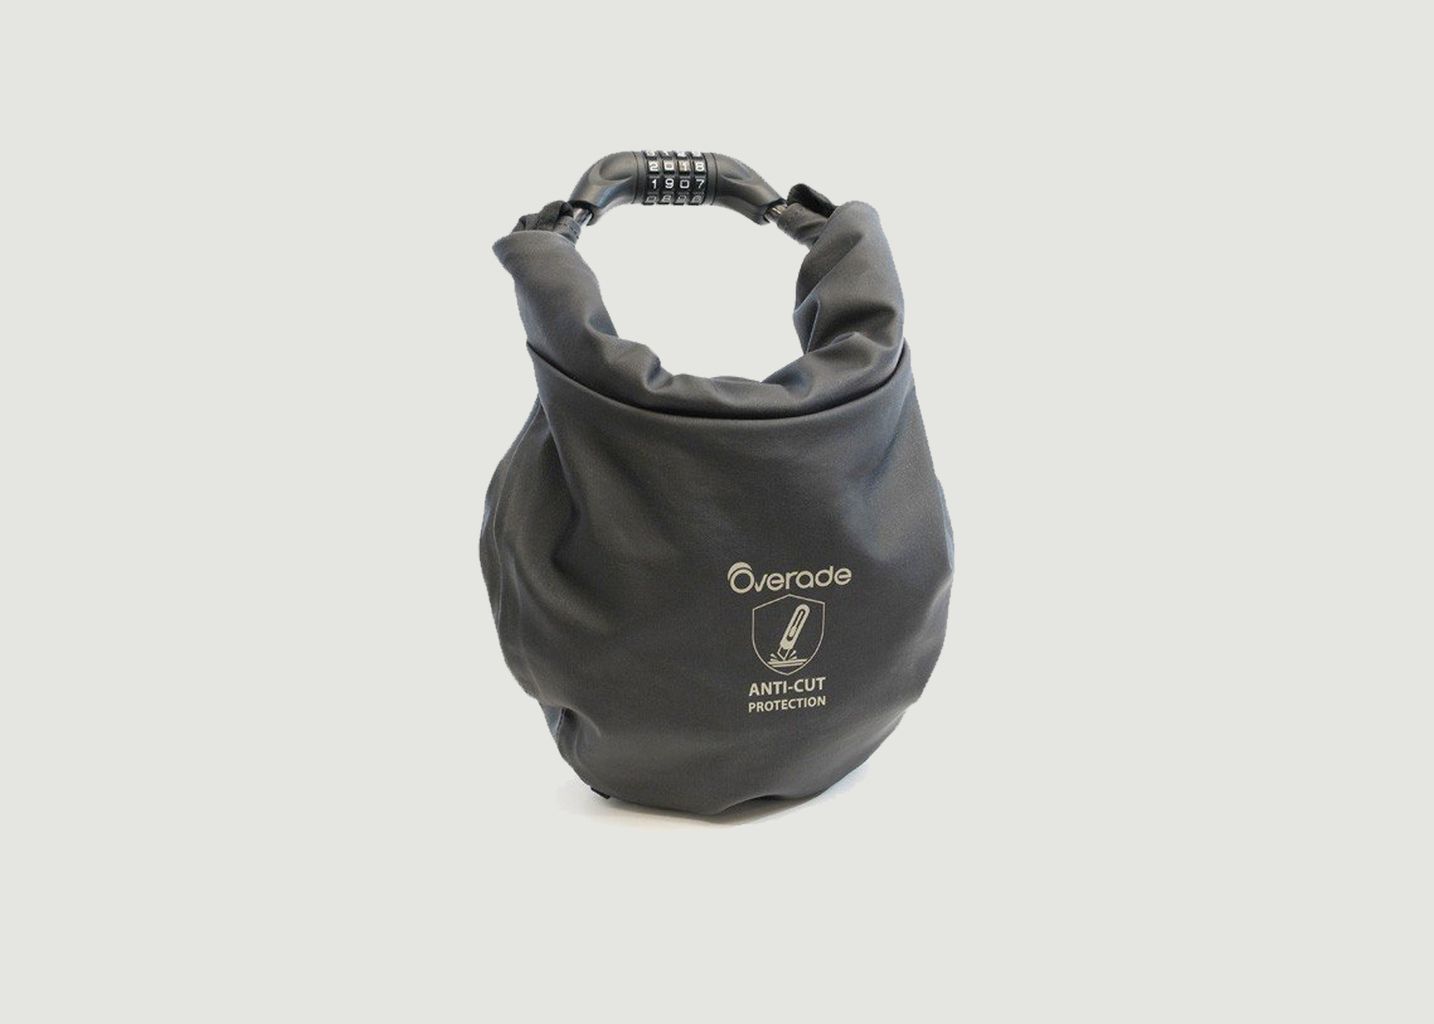 Loxi anti-theft and waterproof bag 4L - Overade